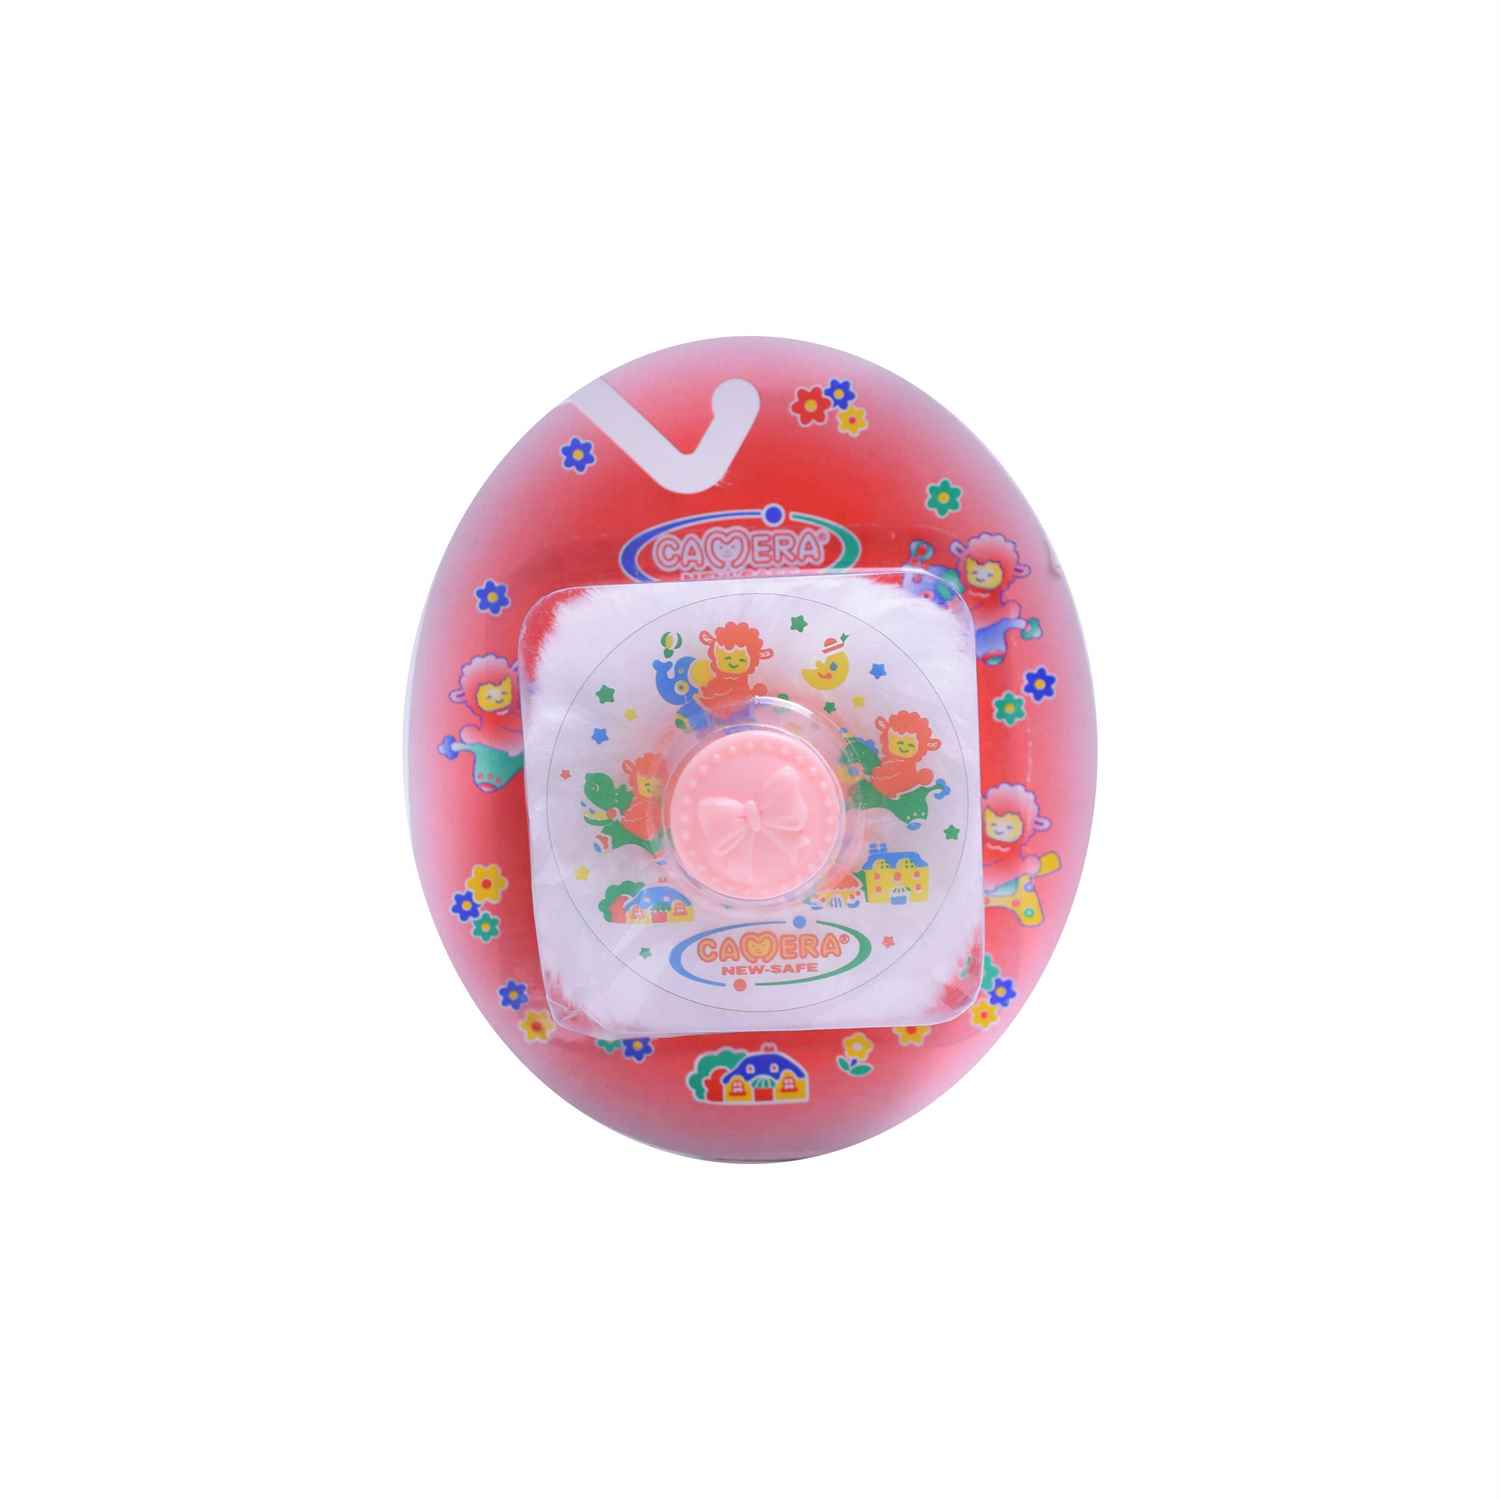 Camera Baby Powder Puff Box with feather touch Puff - Pink